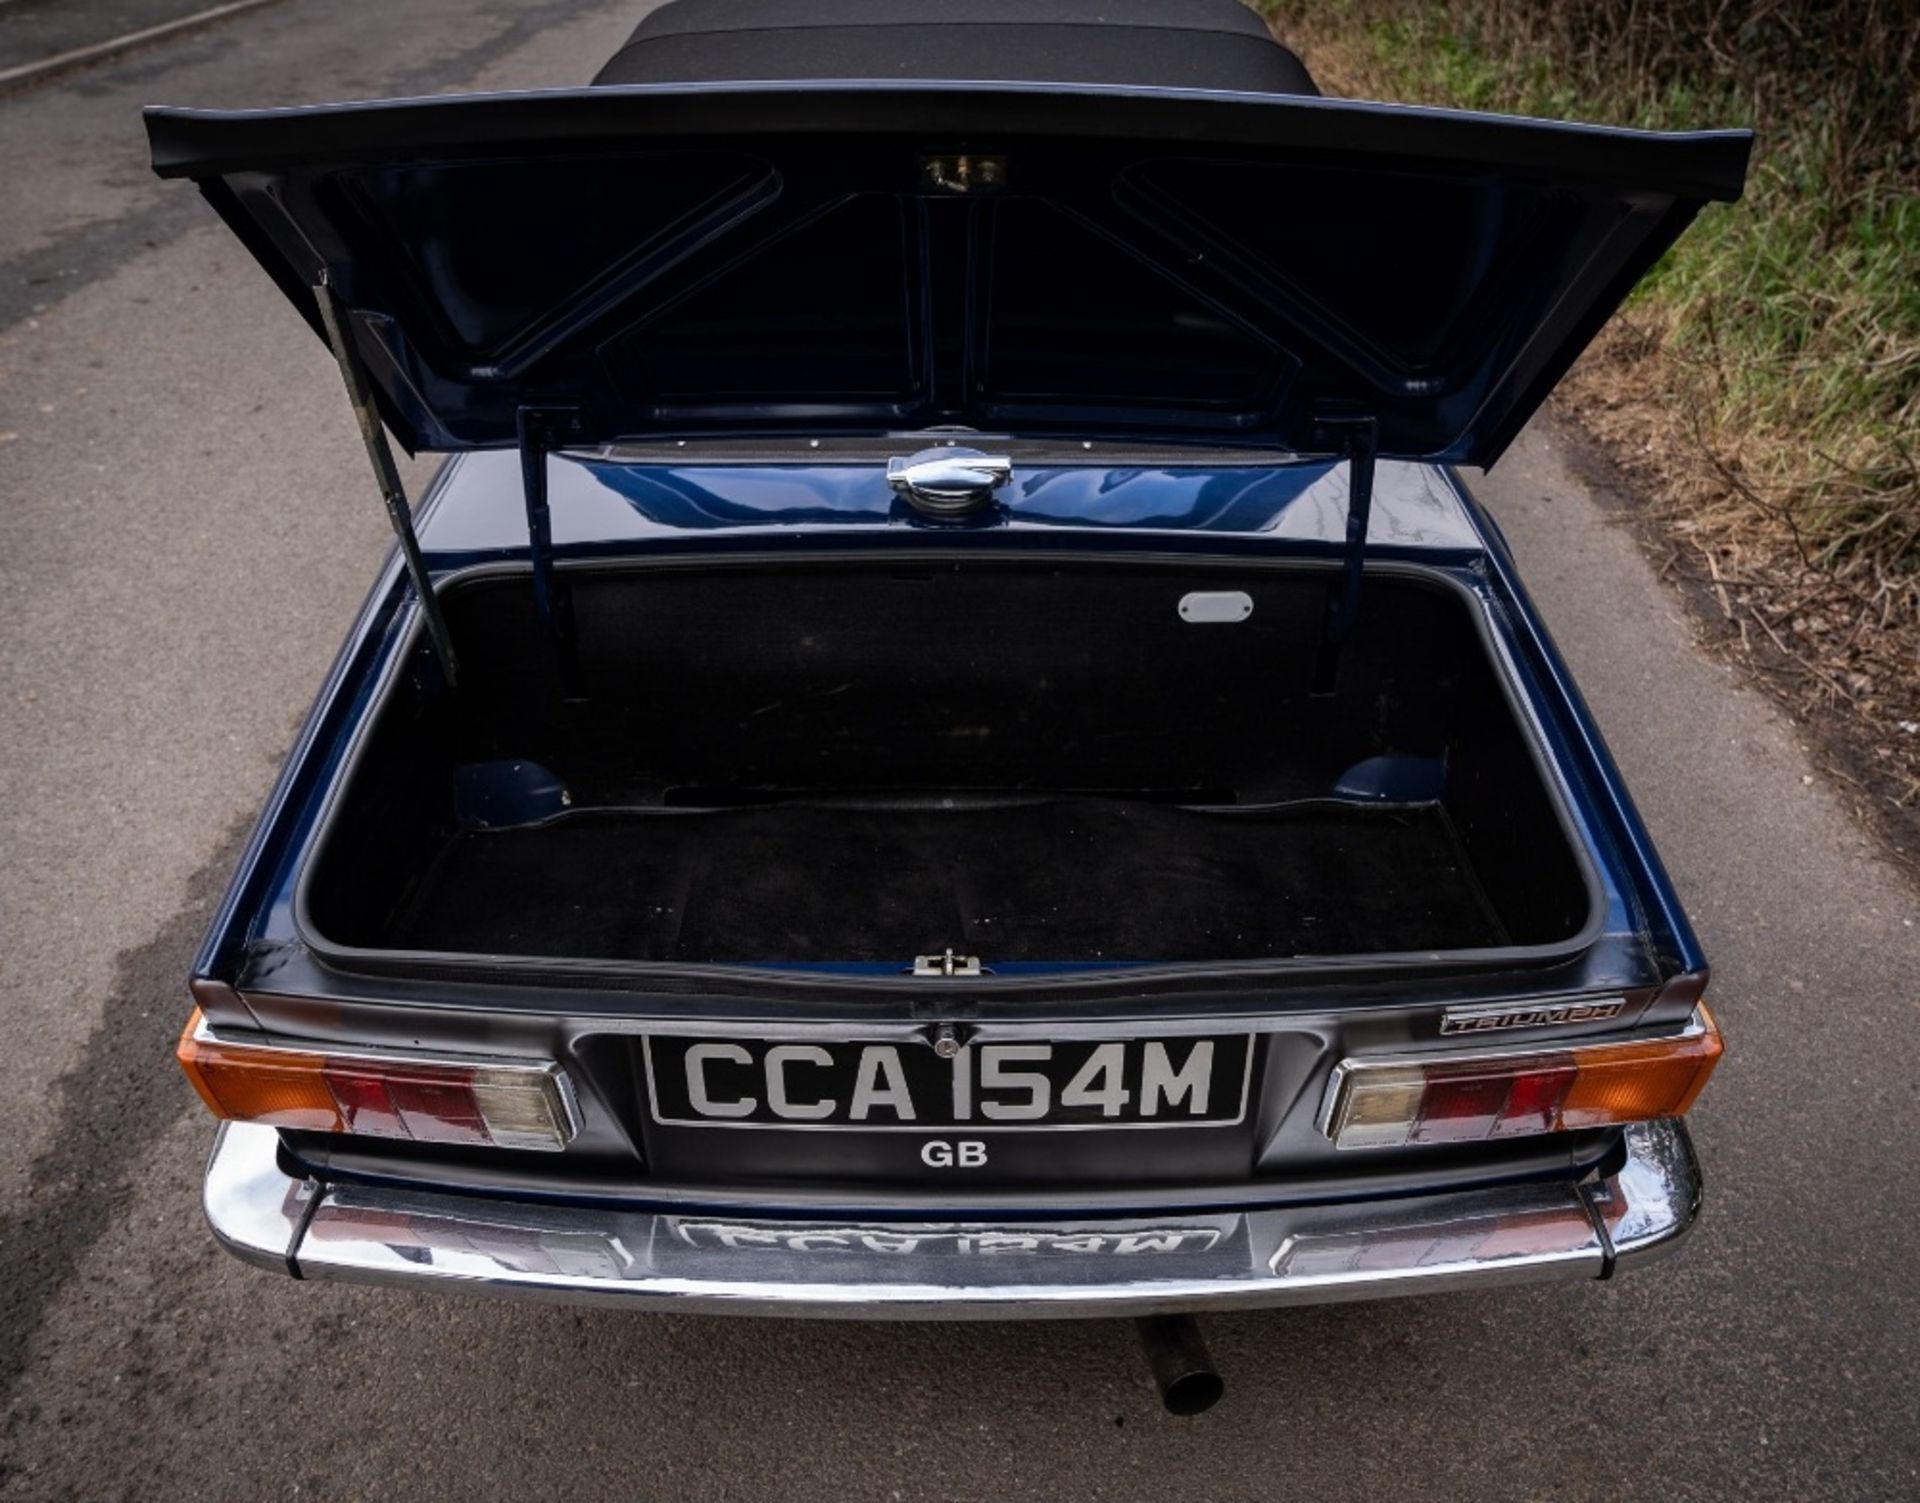 1974 TRIUMPH TR6 Registration Number: CCA 154M Chassis Number: CF21486U Recorded Mileage: c.15,000 - Image 12 of 16